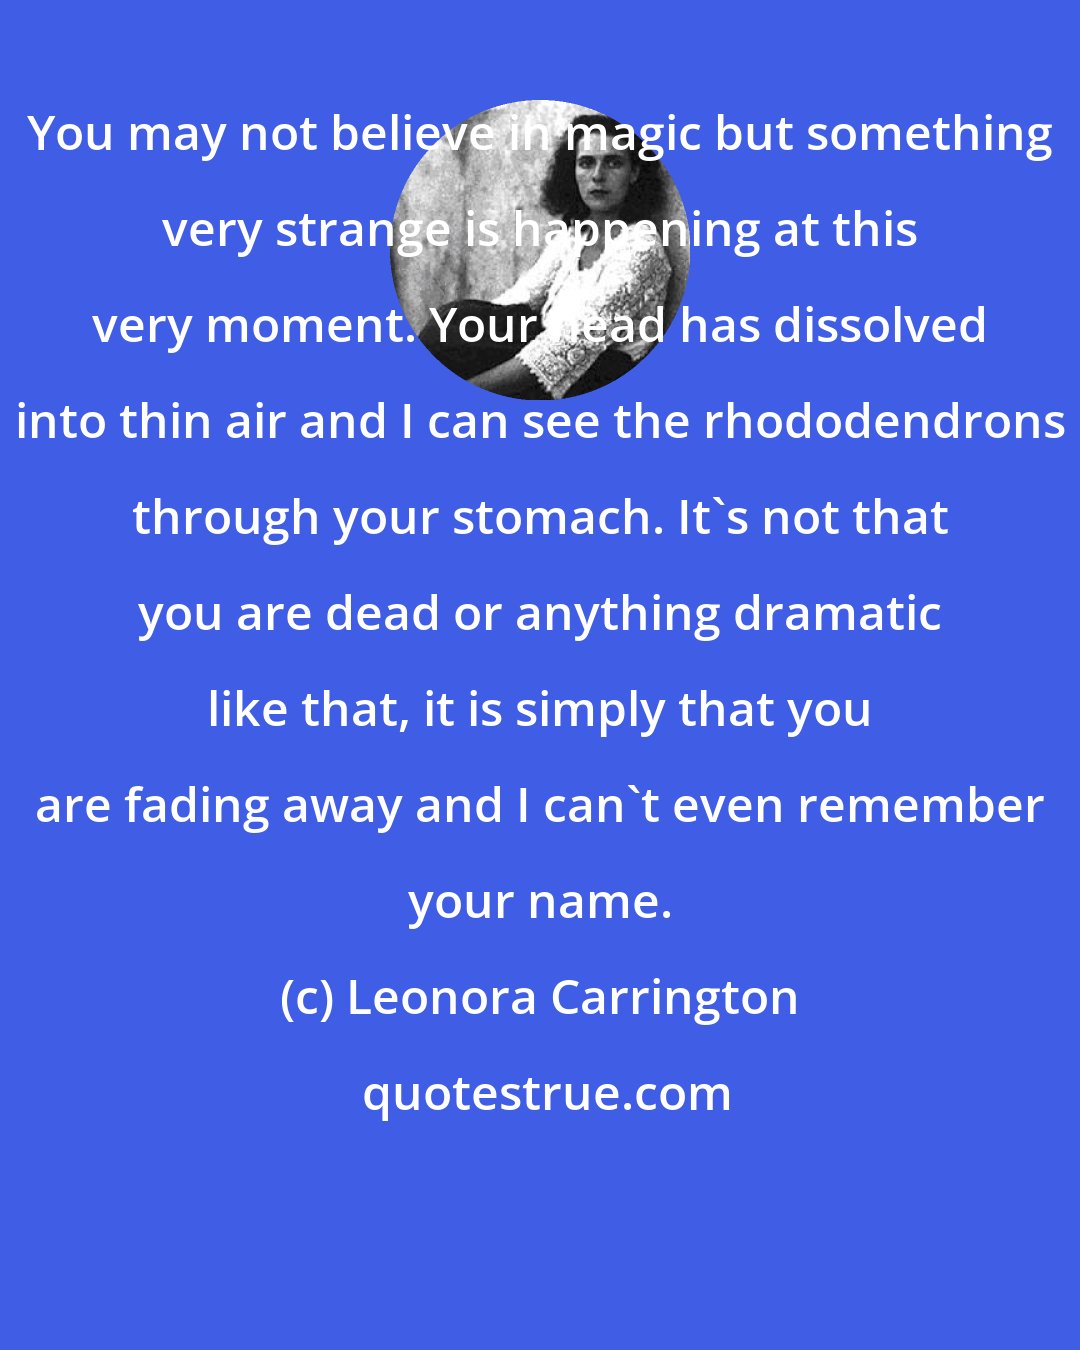 Leonora Carrington: You may not believe in magic but something very strange is happening at this very moment. Your head has dissolved into thin air and I can see the rhododendrons through your stomach. It's not that you are dead or anything dramatic like that, it is simply that you are fading away and I can't even remember your name.